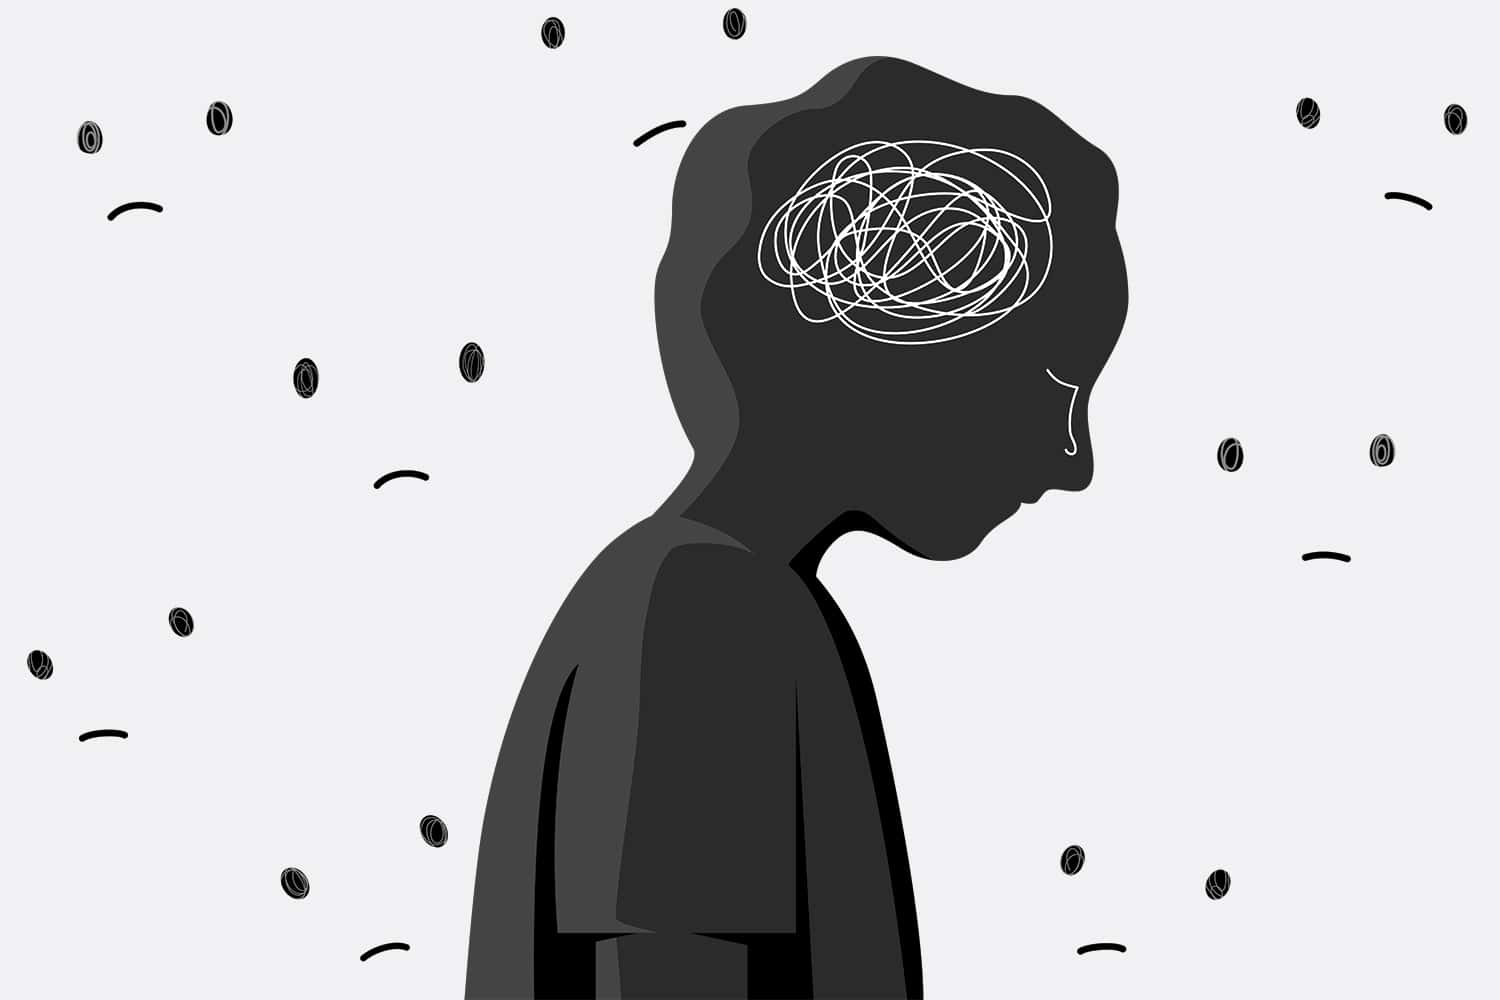 graphic of cartoon child in profile and shadow, head down, with squiggly lines in head, with sad eyes and mouths looking on, on grey background